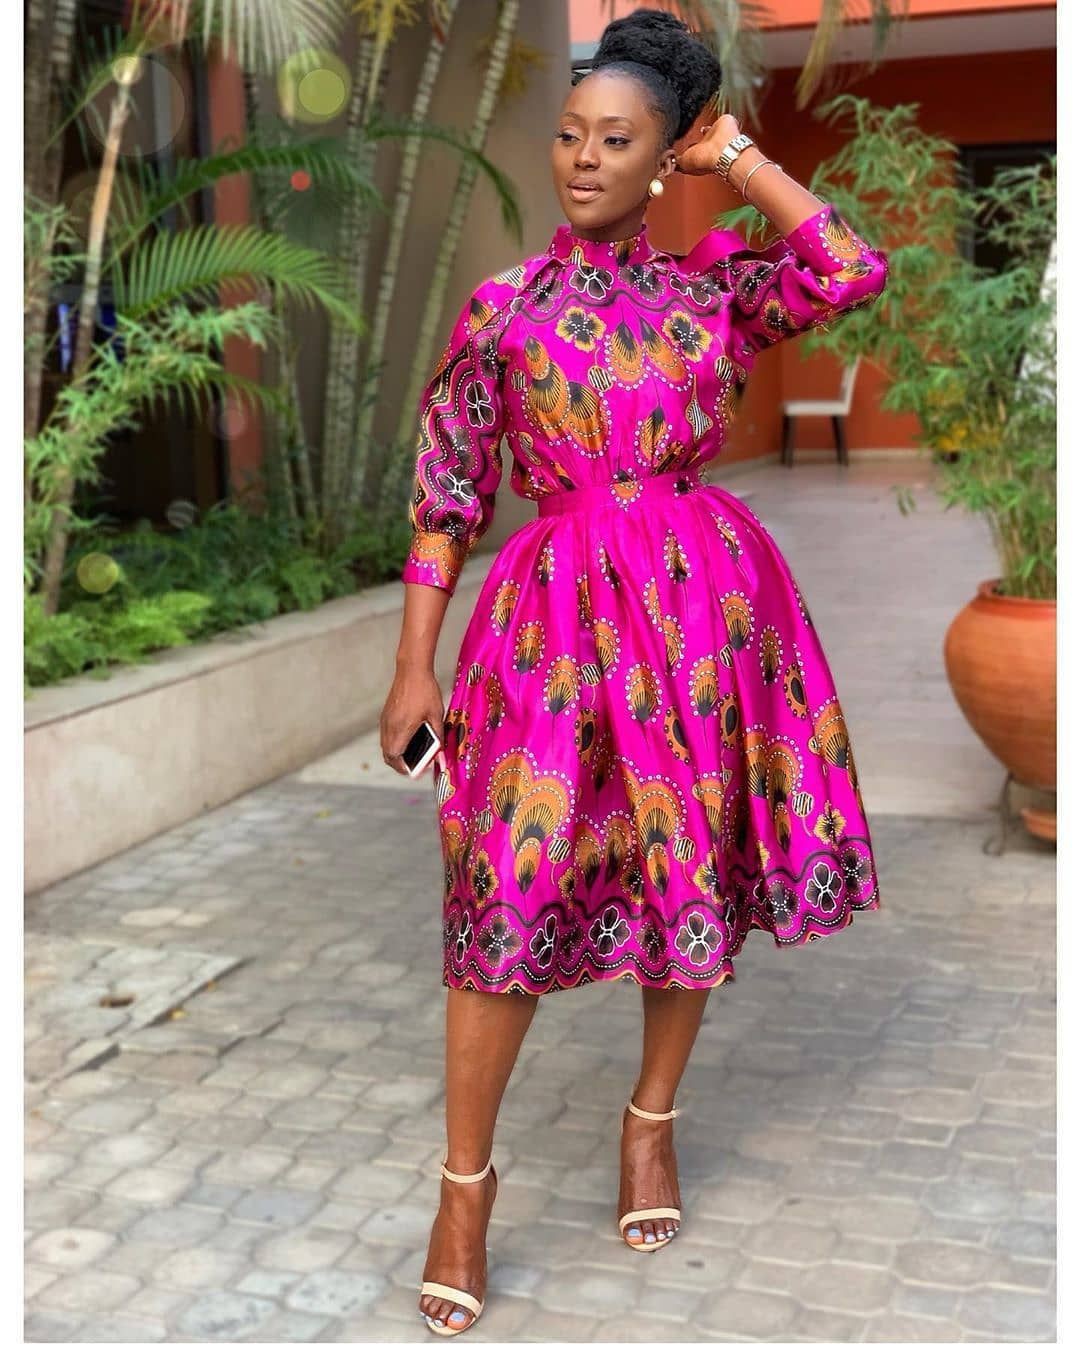 Find out these nice & adorable fashion model, African wax prints: Cocktail Dresses,  fashion blogger,  Dutch Wax,  Ankara Outfits,  Formal wear,  Photo shoot  